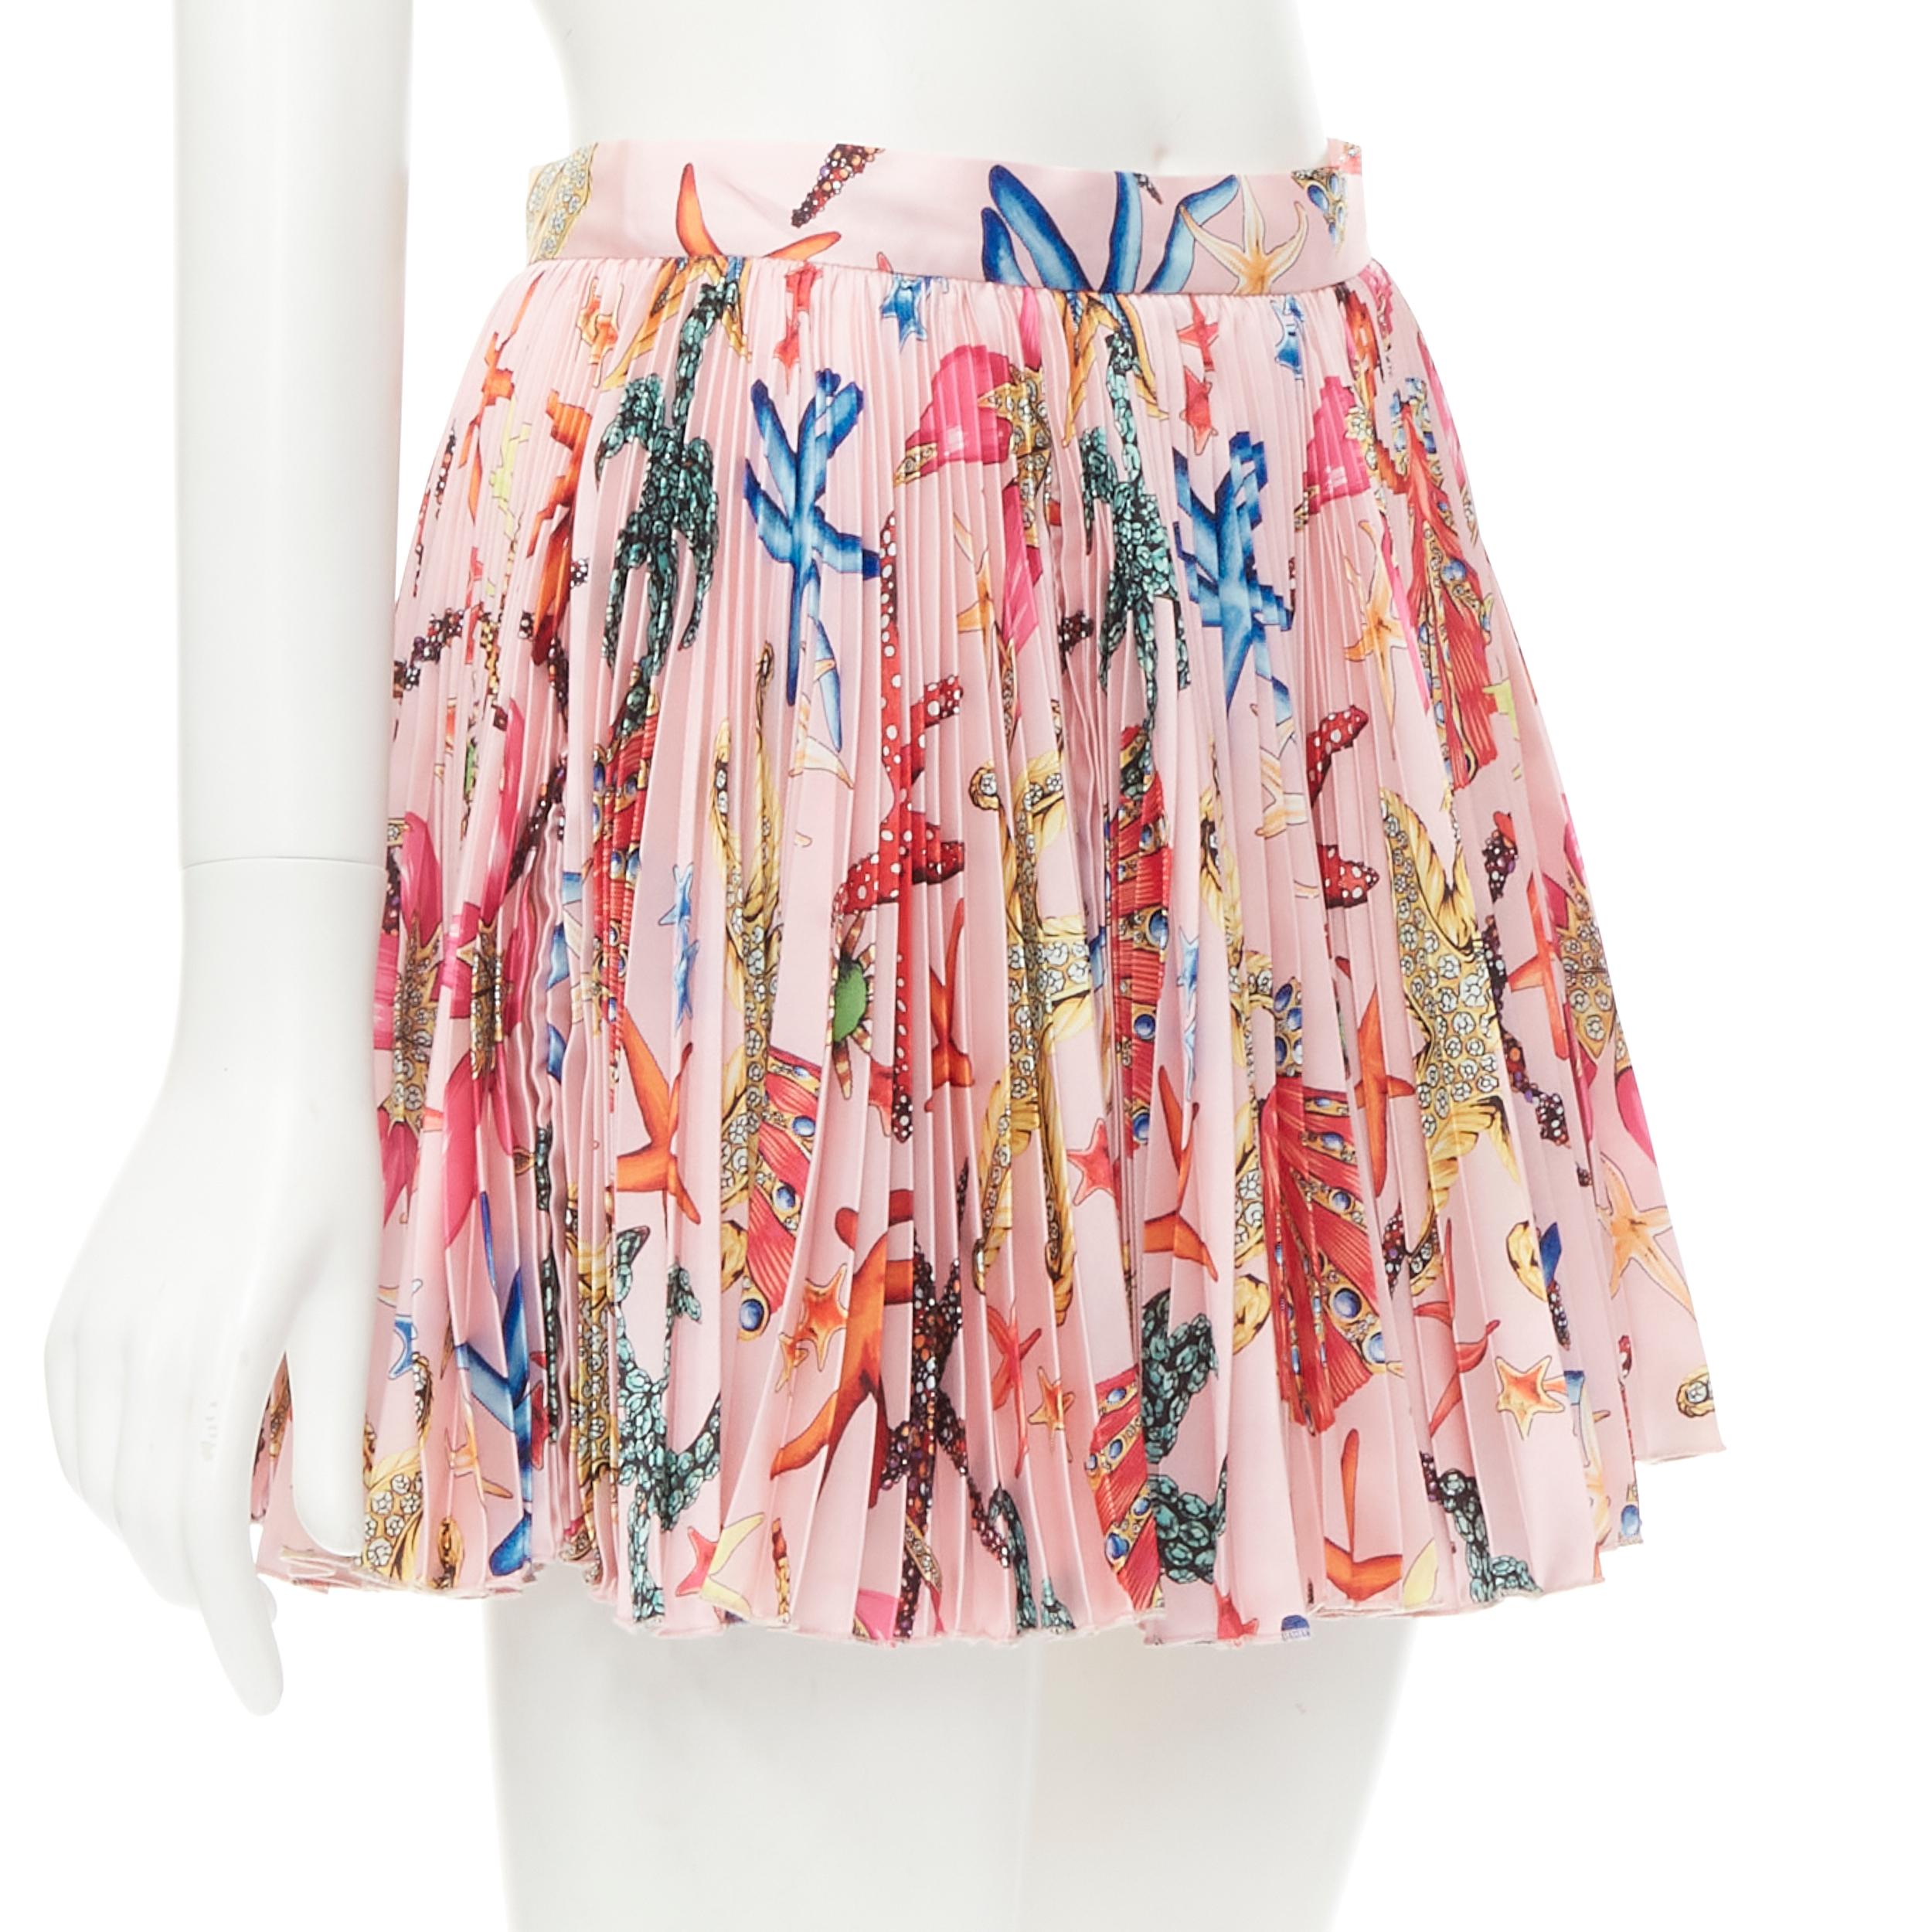 new VERSACE Kids Tresor De La Mer pink pleated mini skirt 12A XS 
Reference: TGAS/C01053 
Brand: Versace 
Collection: Tresor De La Mer 
Color: Pink 
Pattern: Abstract 
Extra Detail: For 12 years old- fits women's XS 
Made in: Italy 

CONDITION: